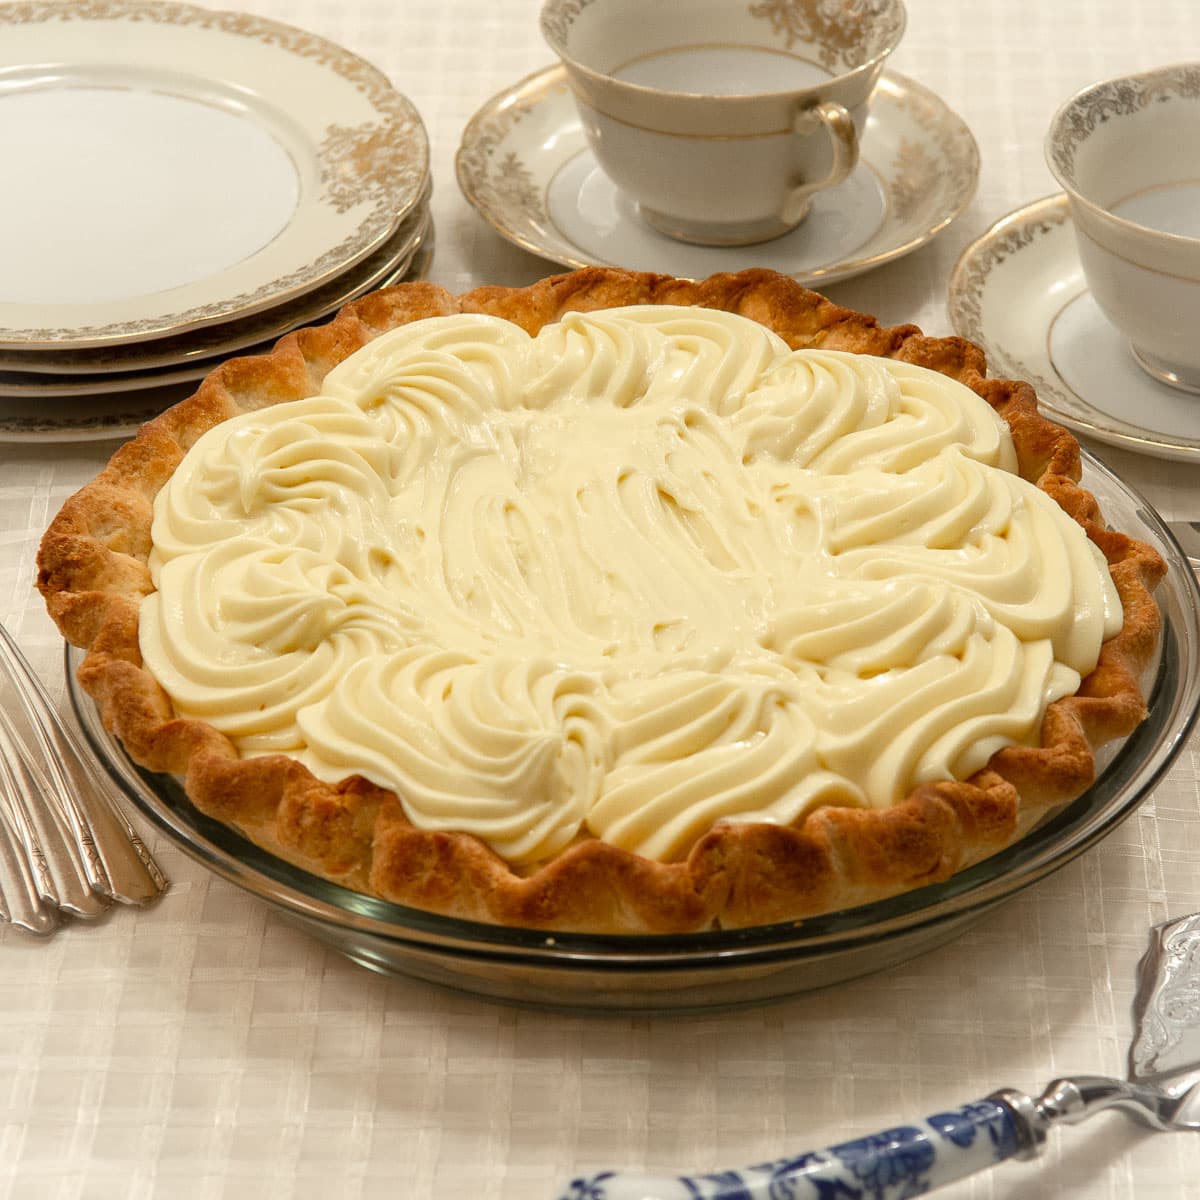 Double Banana Cream Pie with plates and cups and saucers.